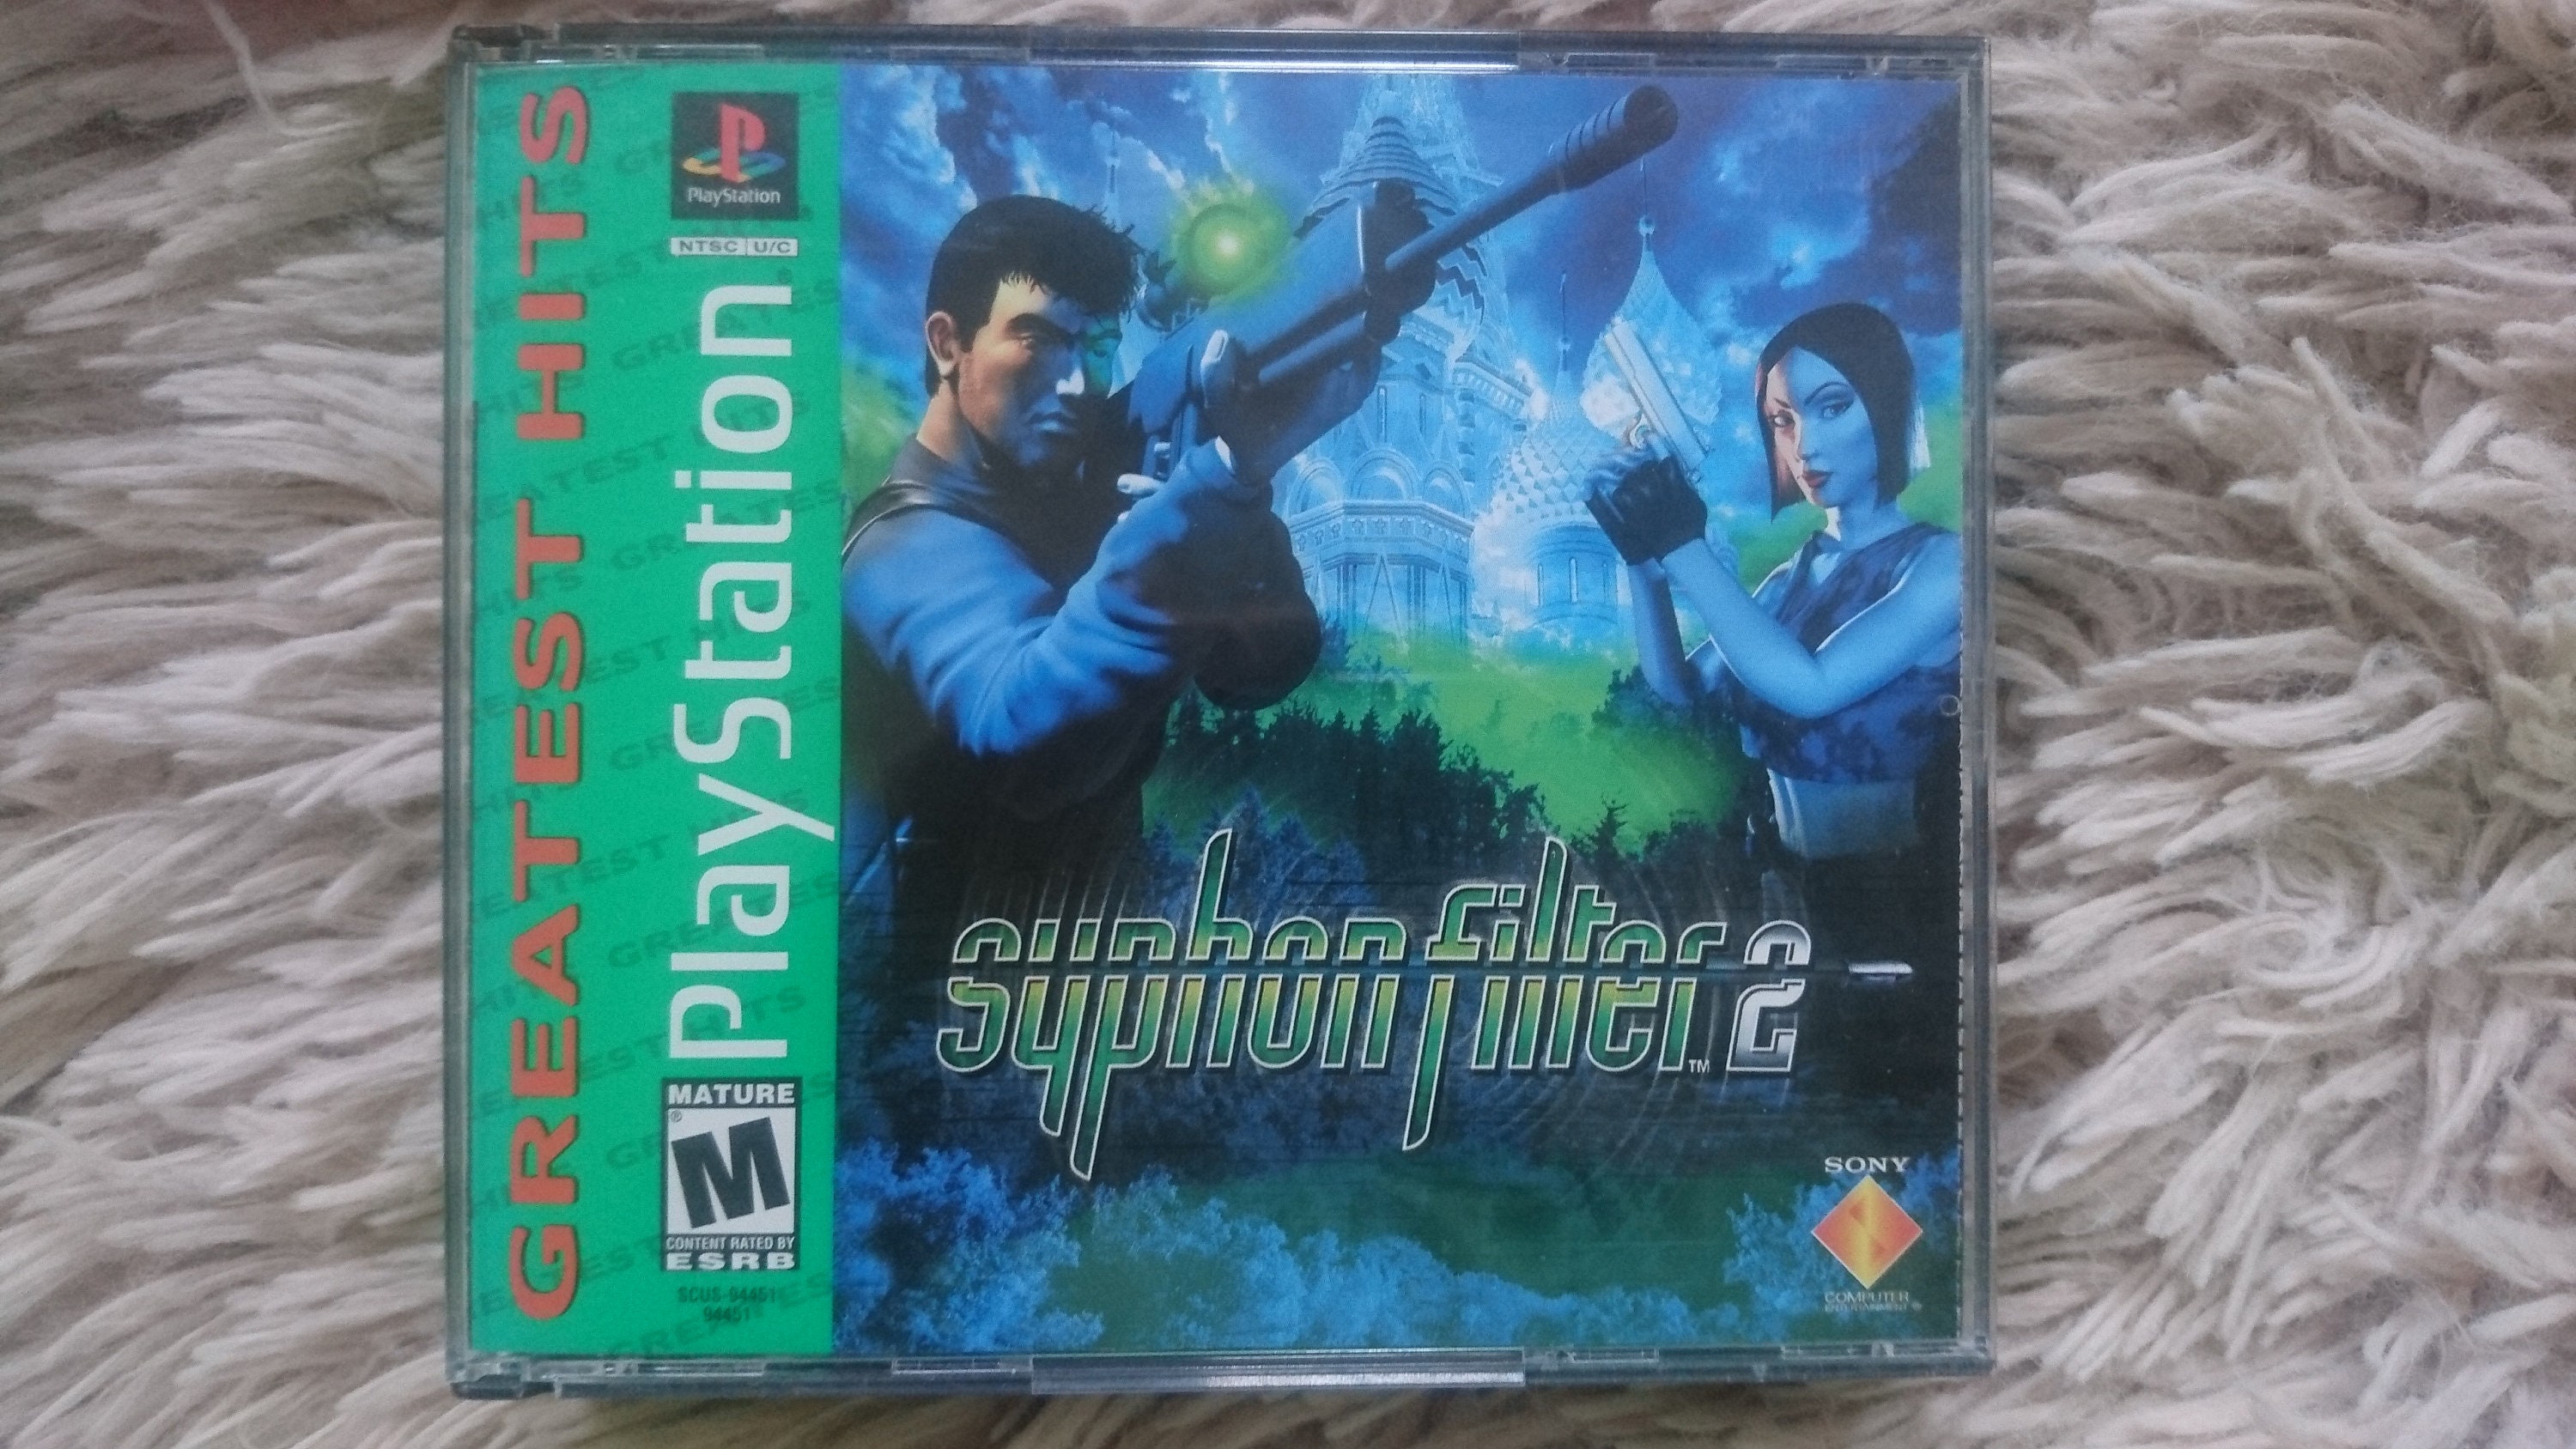 SYPHON FILTER 2 (PAL) - FRENCH ADVERT